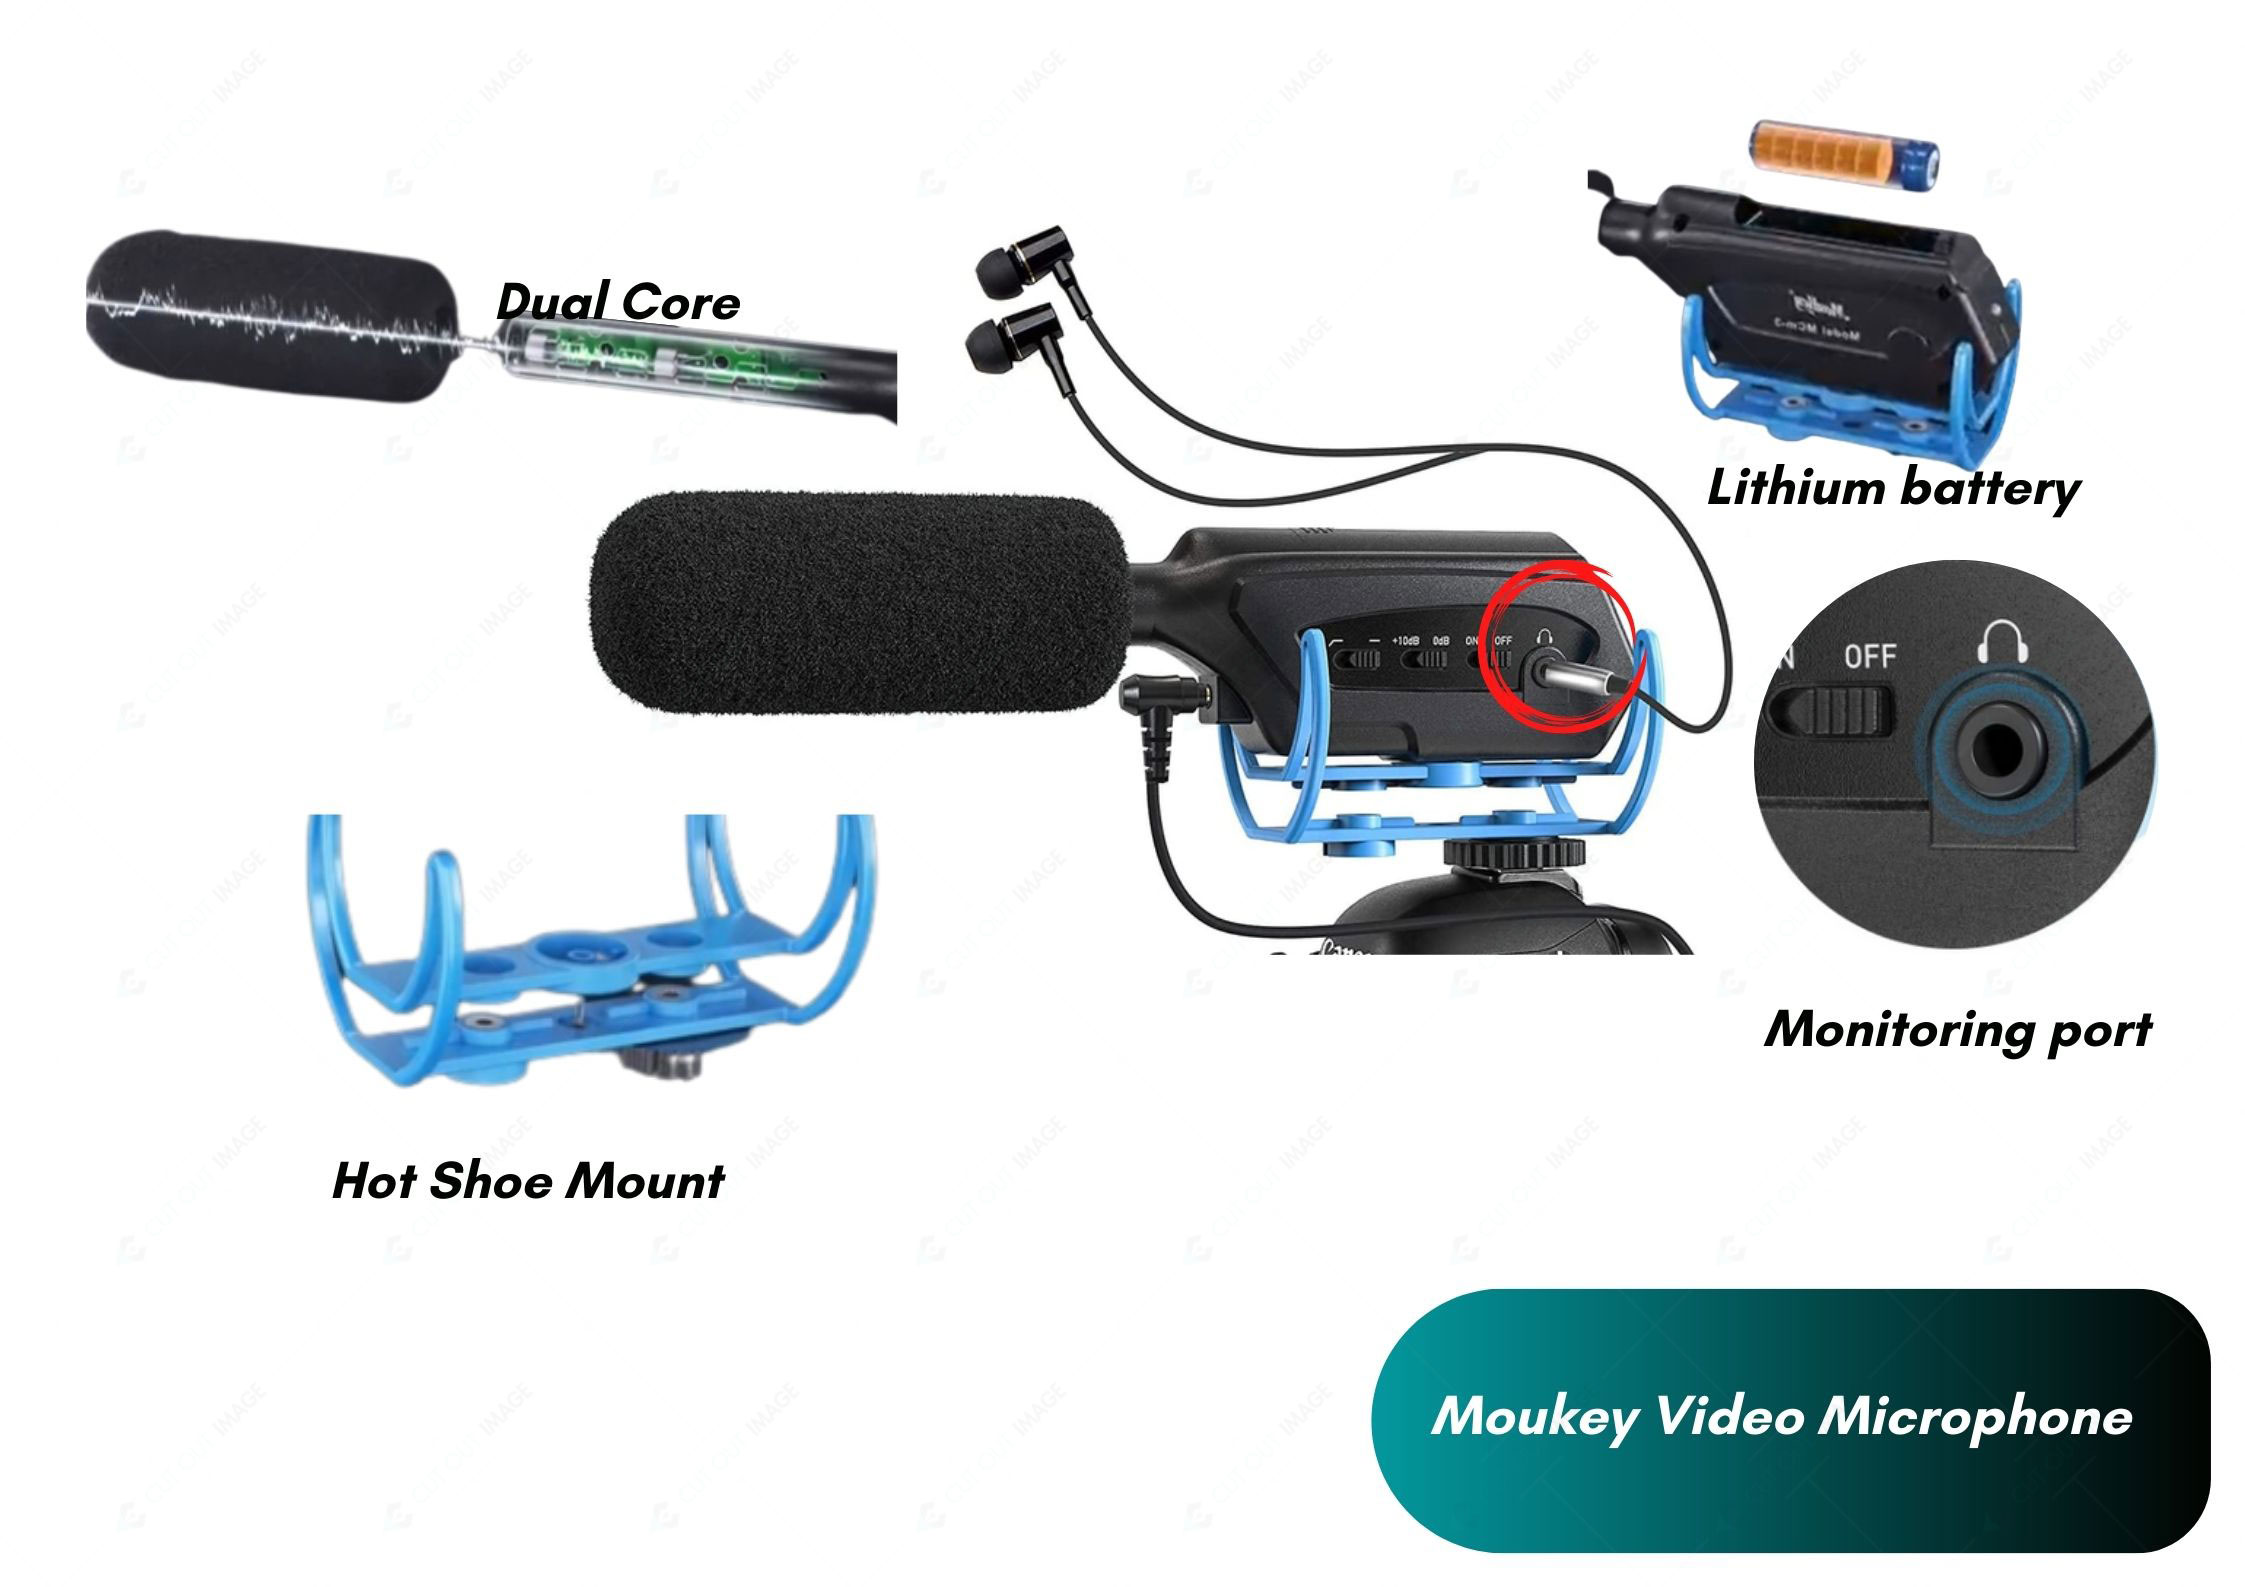 Moukey Video Microphone